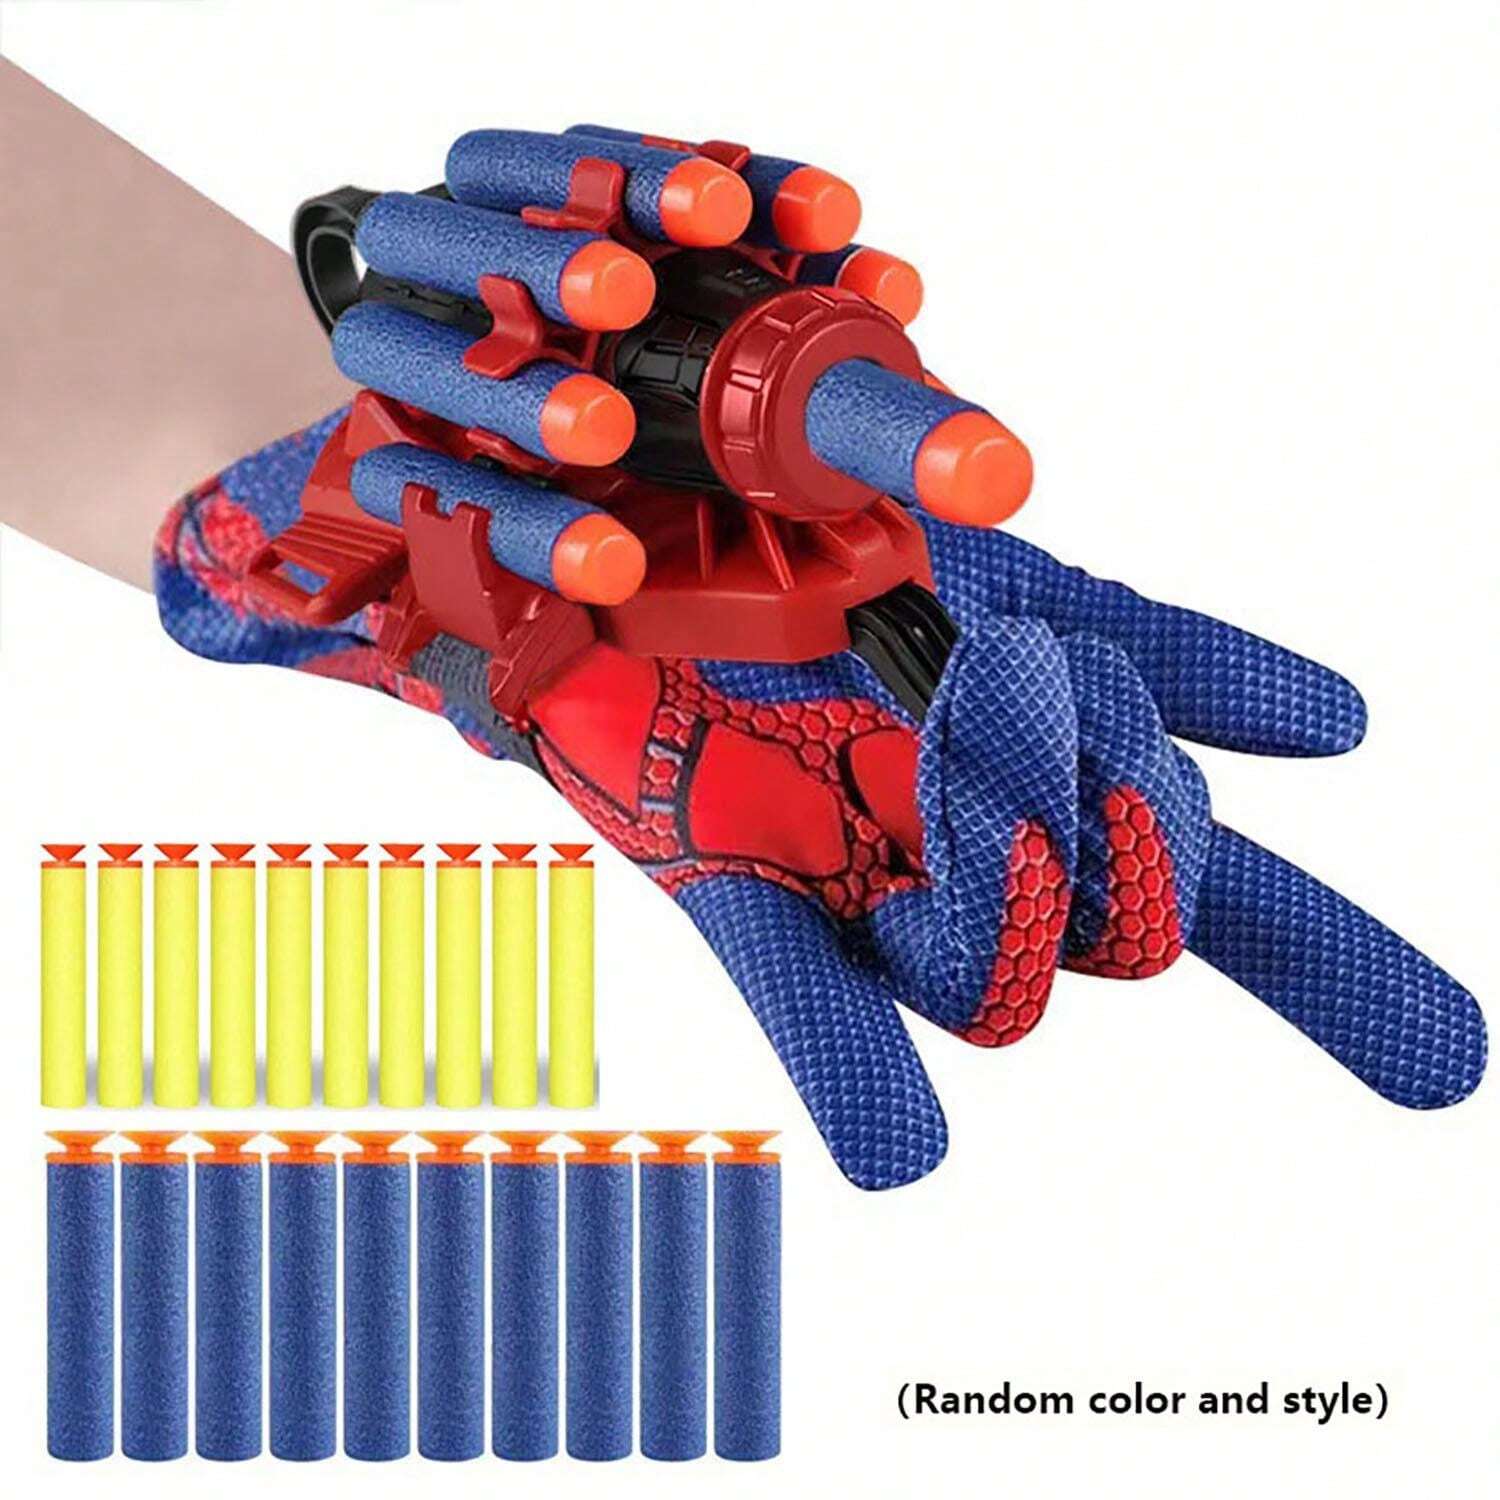 Spider Silk Shooting Game Toy Gun - Safe And Imaginative Fun For Kids Aged 6-8, Perfect For Festival Gift (Random Color)